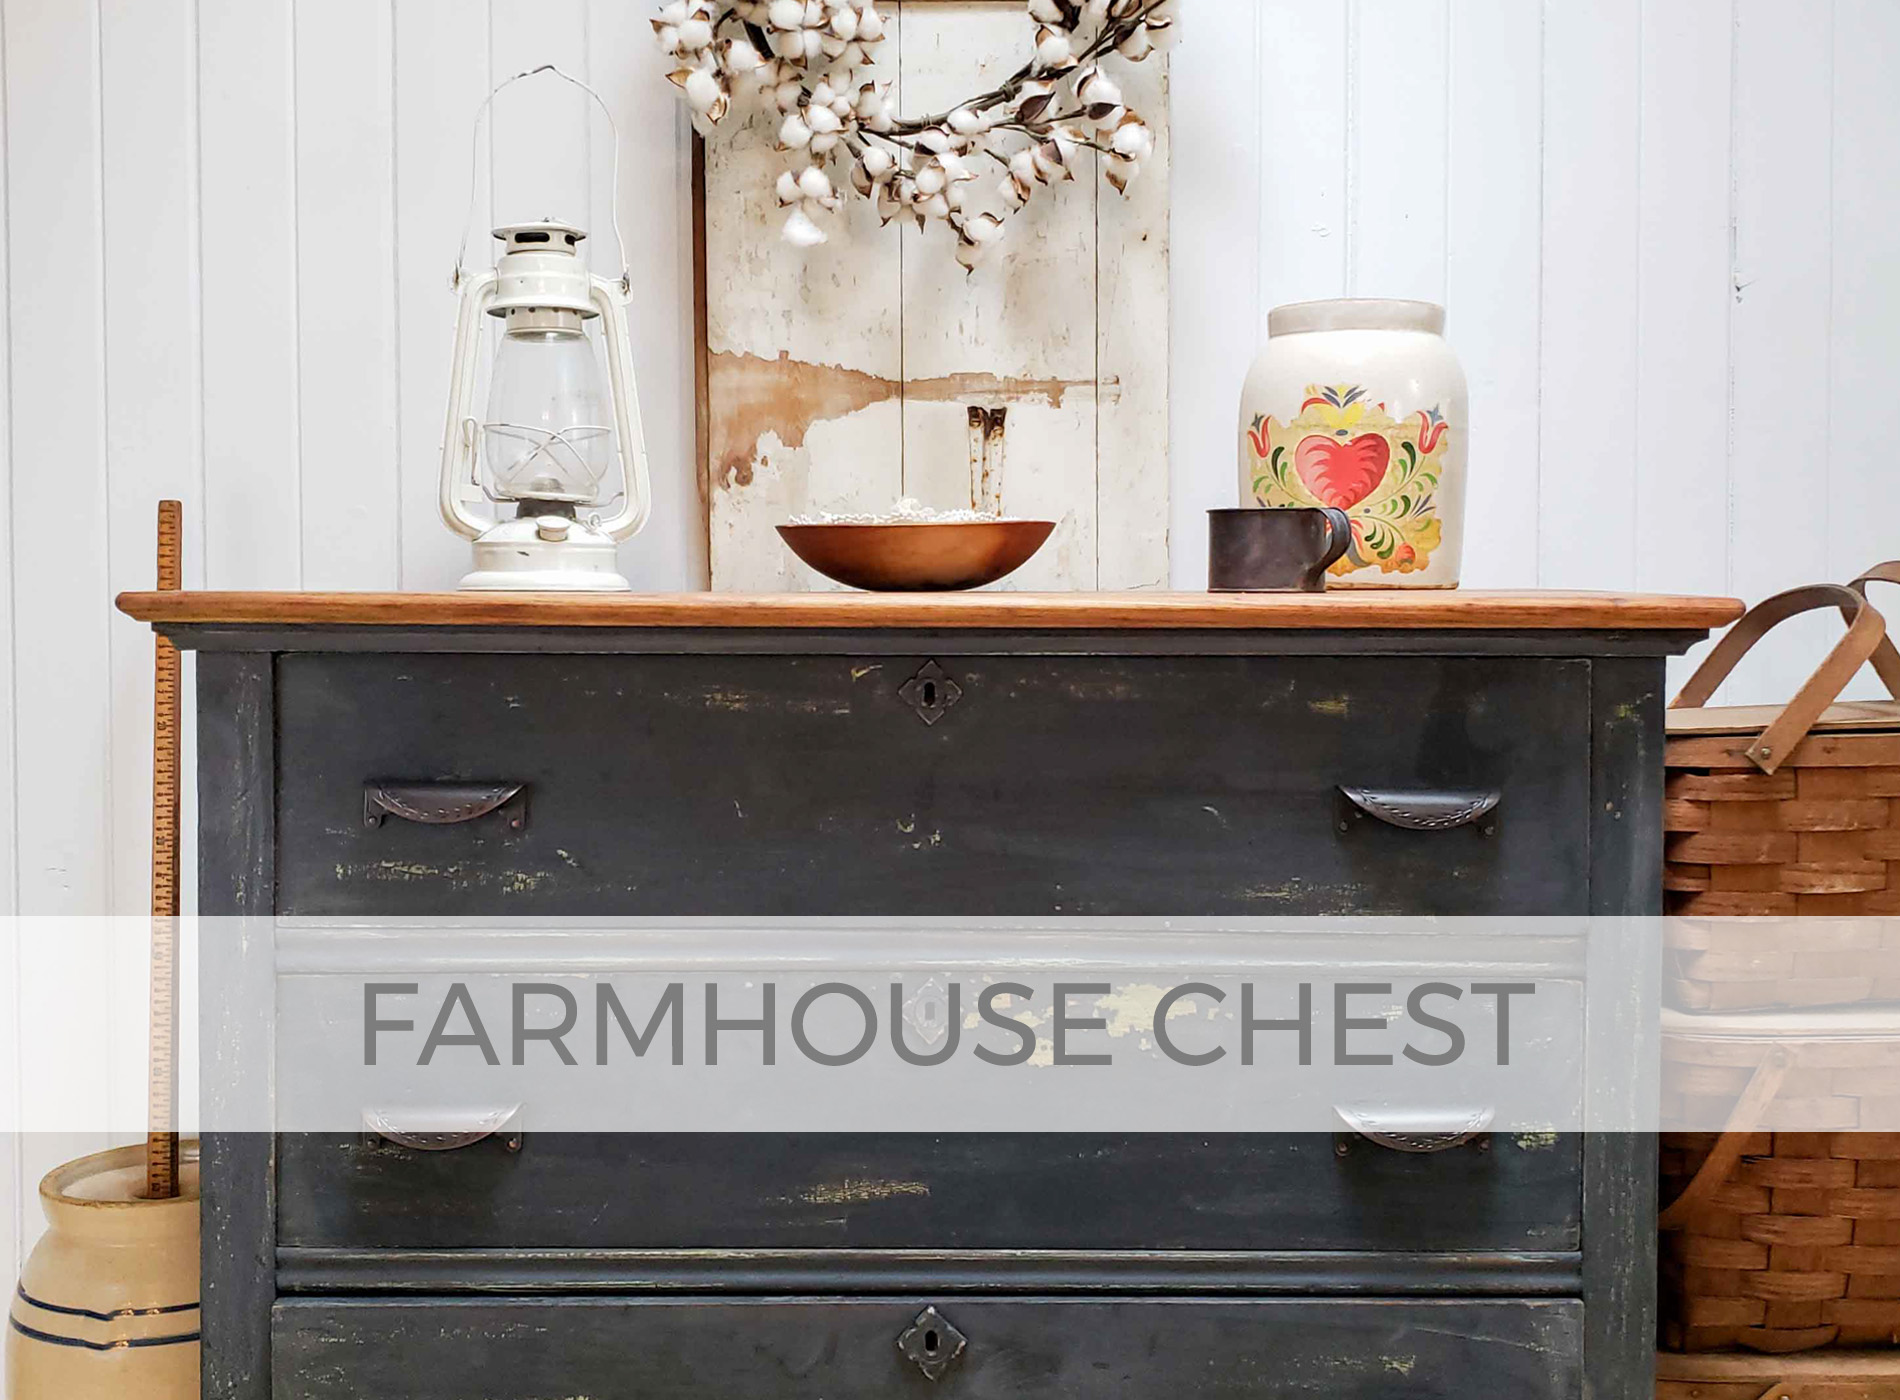 Farmhouse Chest Nightstand by Larissa of Prodigal Pieces | prodigalpieces.com #prodigalpieces